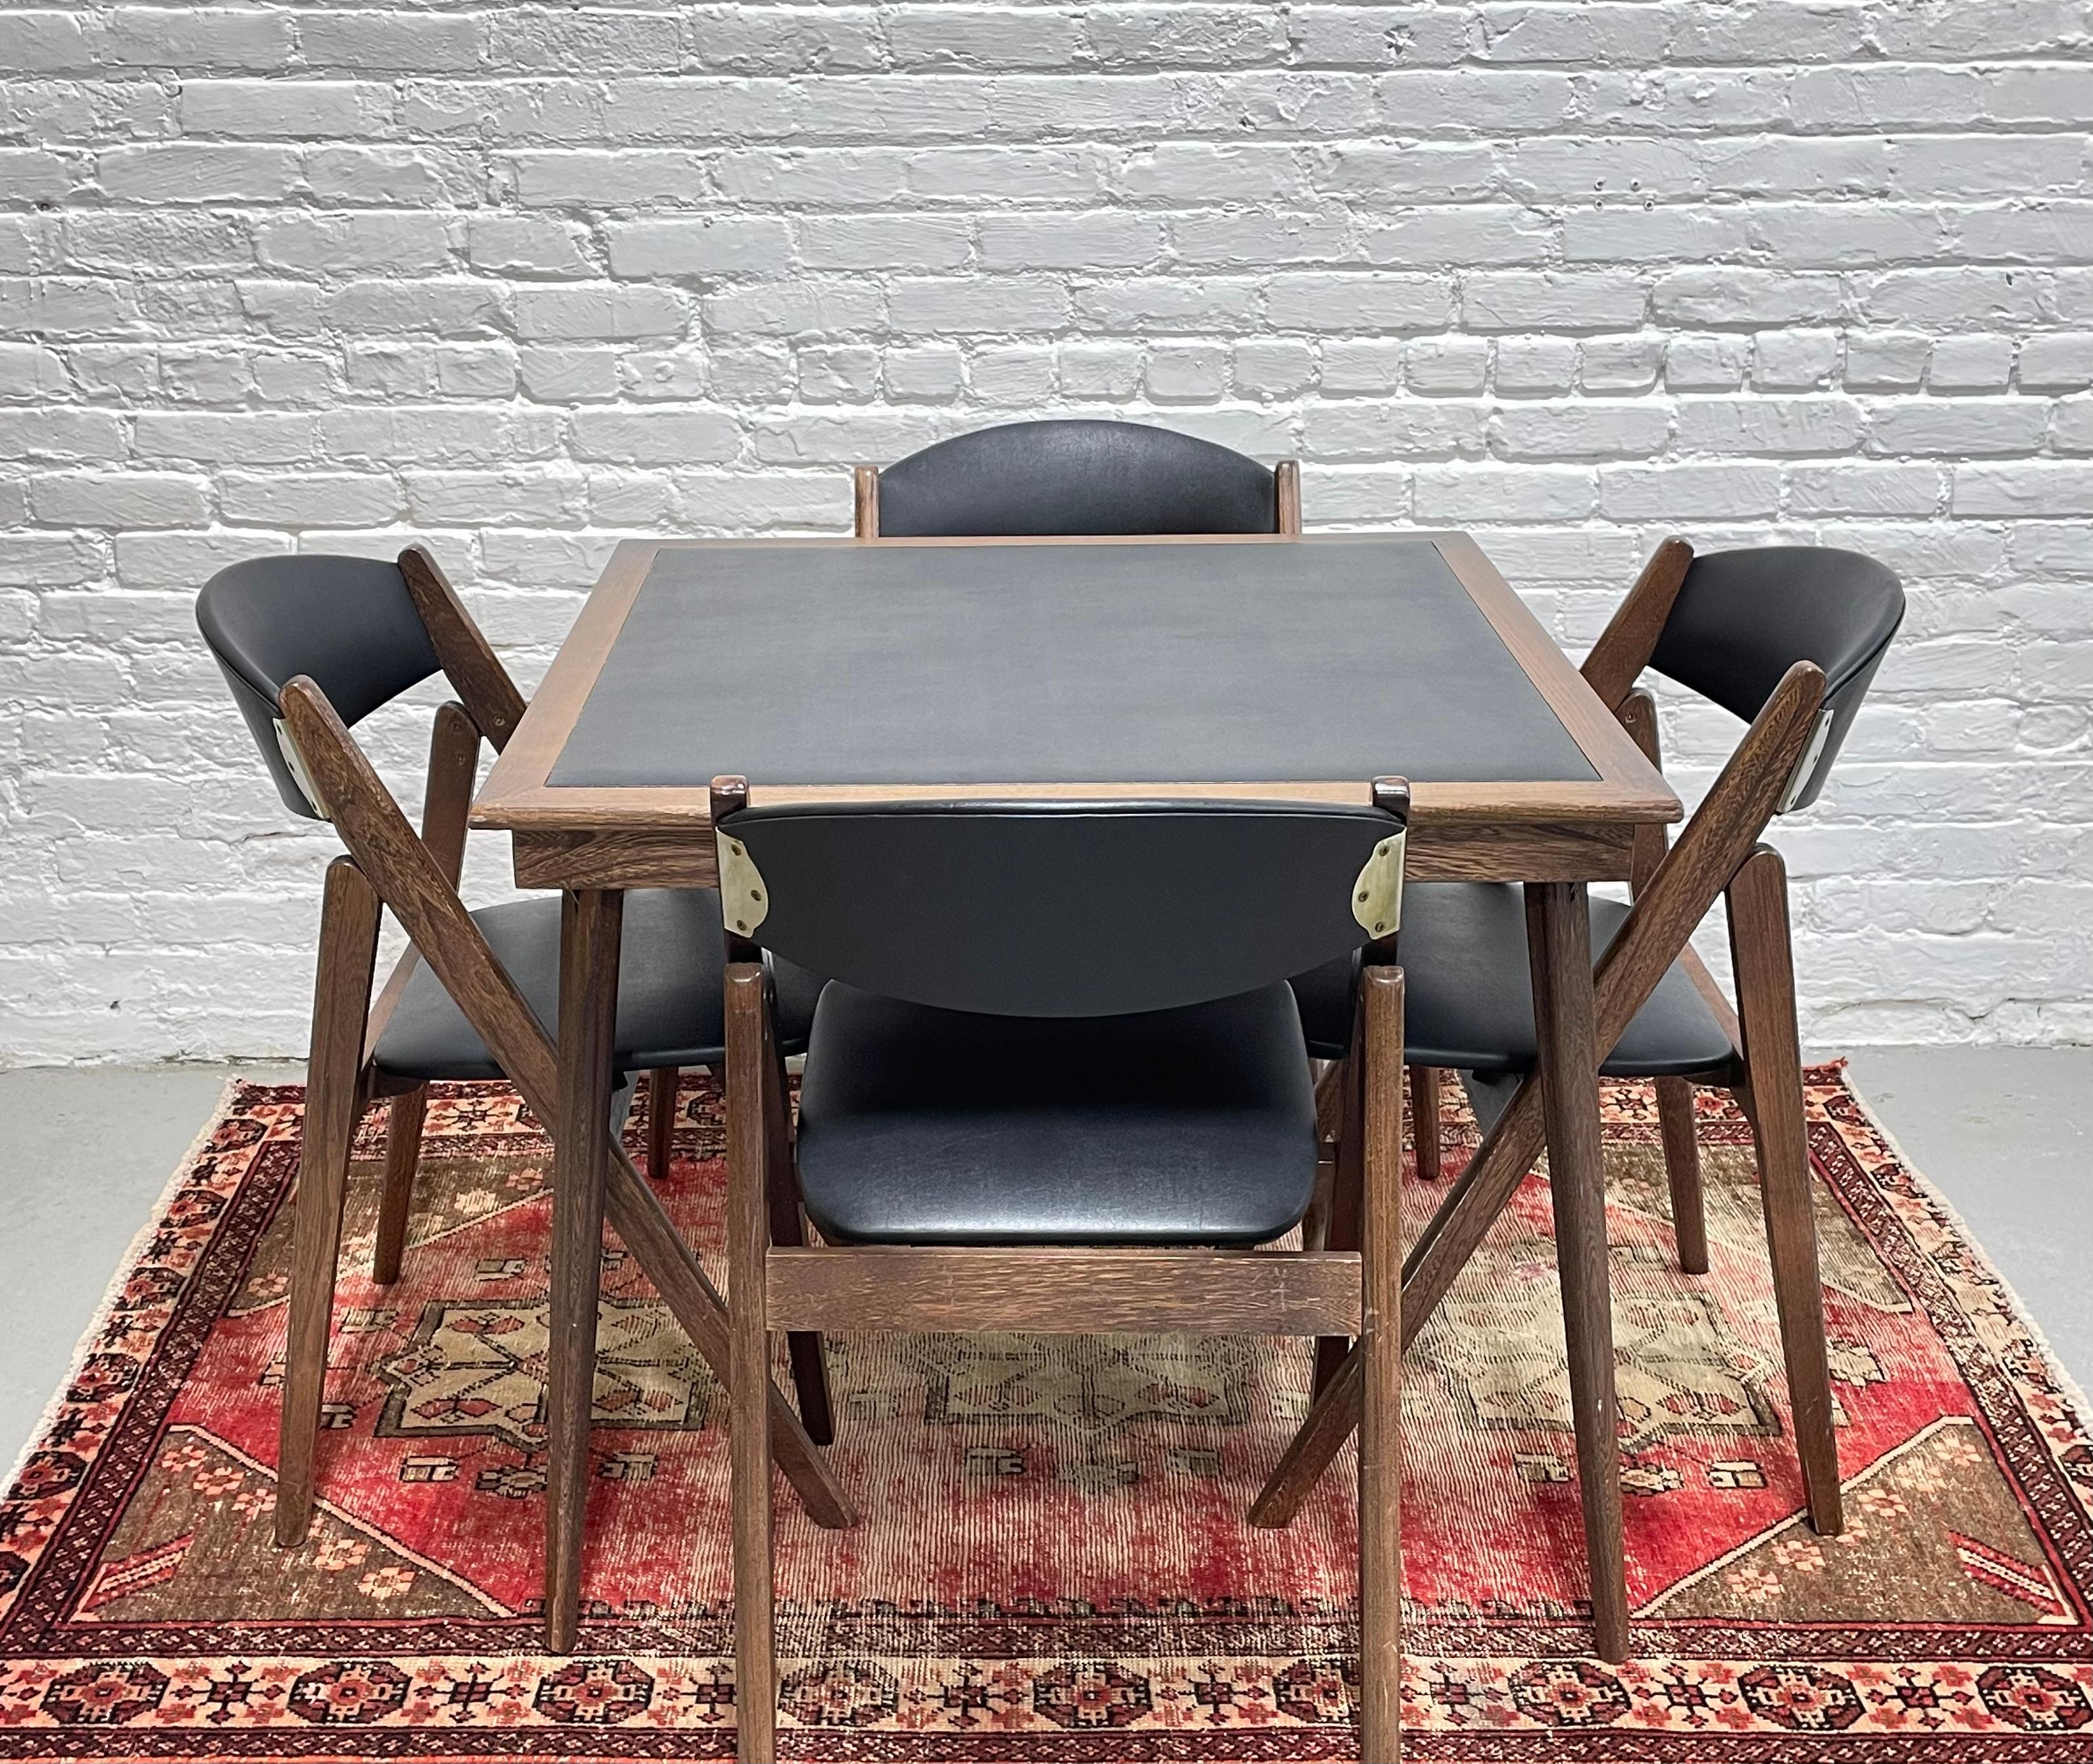 card game table and chairs